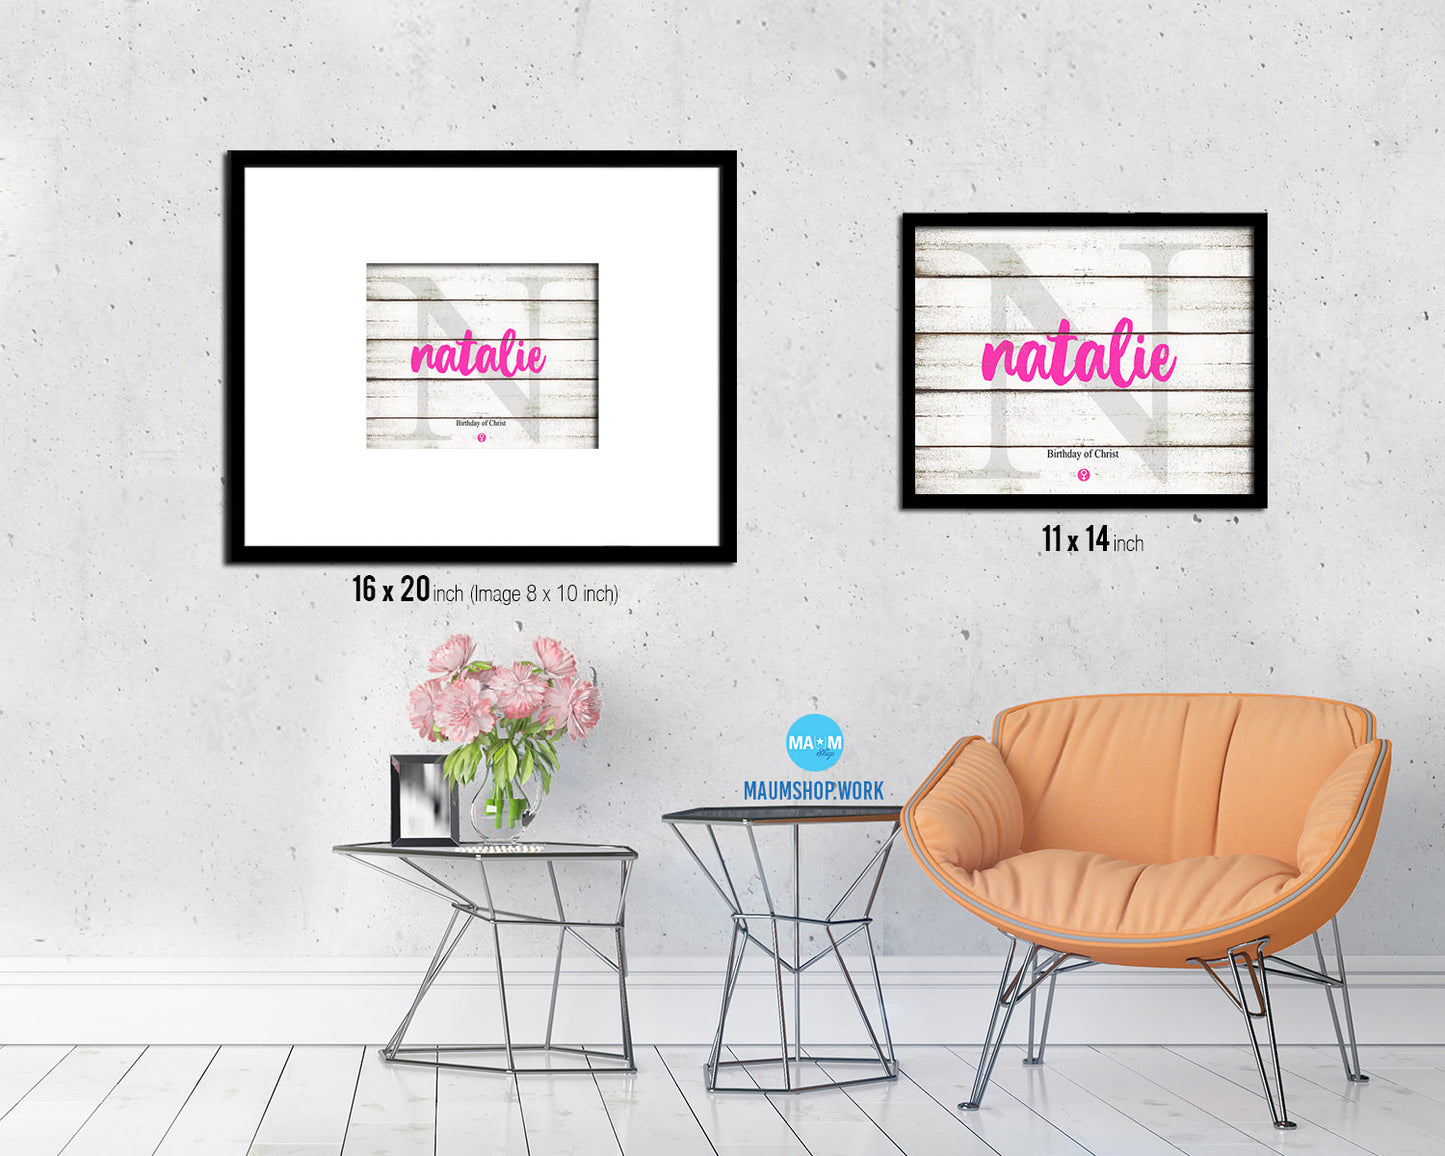 Natalie Personalized Biblical Name Plate Art Framed Print Kids Baby Room Wall Decor Gifts